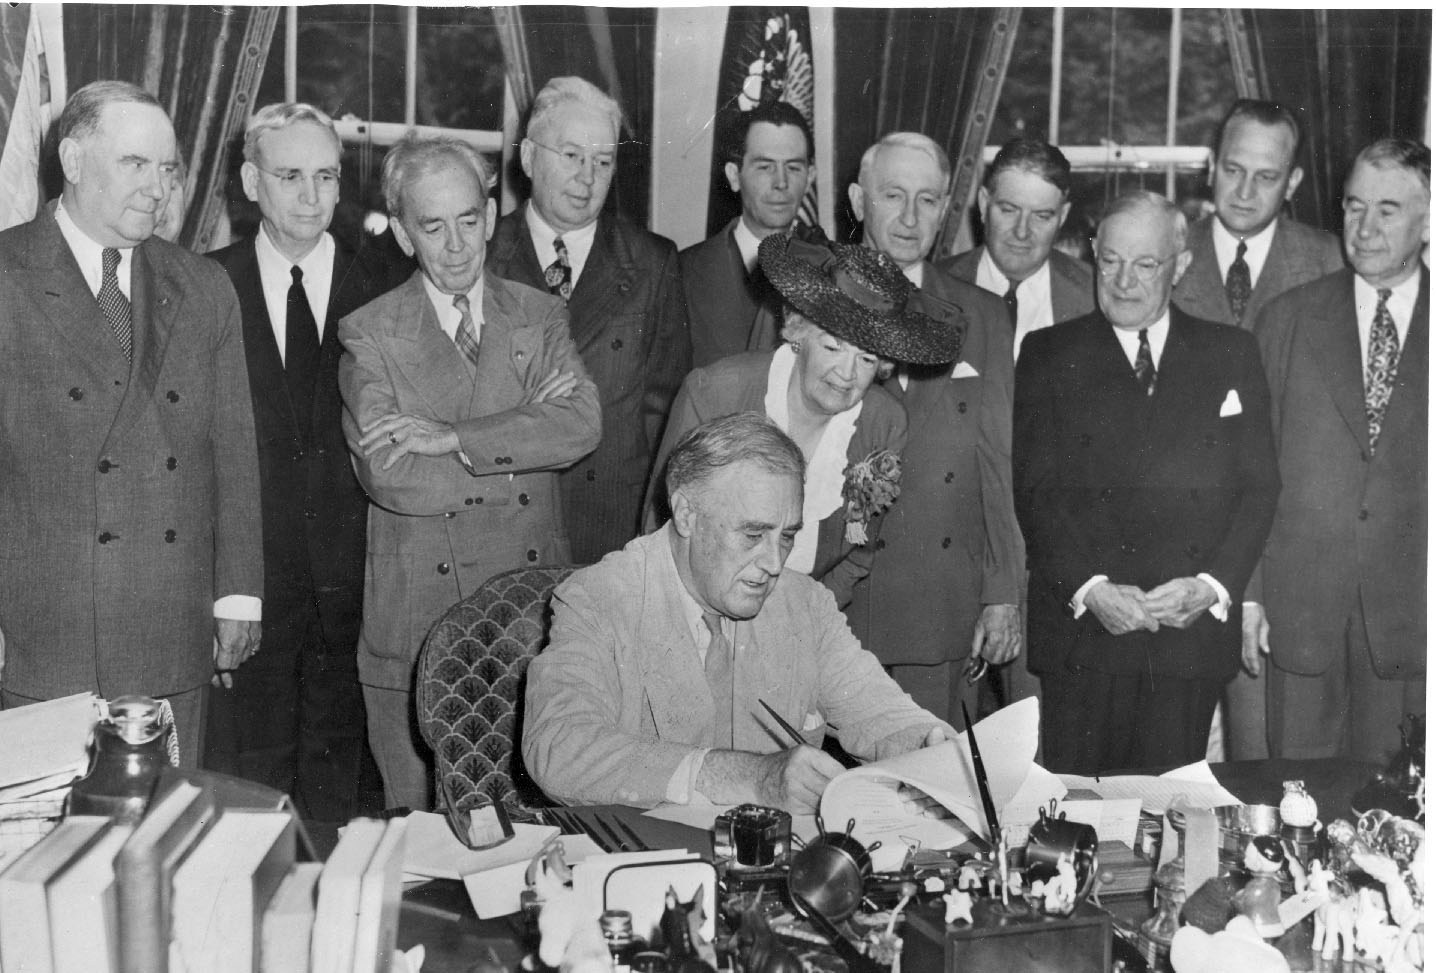 President Franklin D. Roosevelt signs the GI Bill of Rights at the White House, June 22, 1944. Courtesy photo